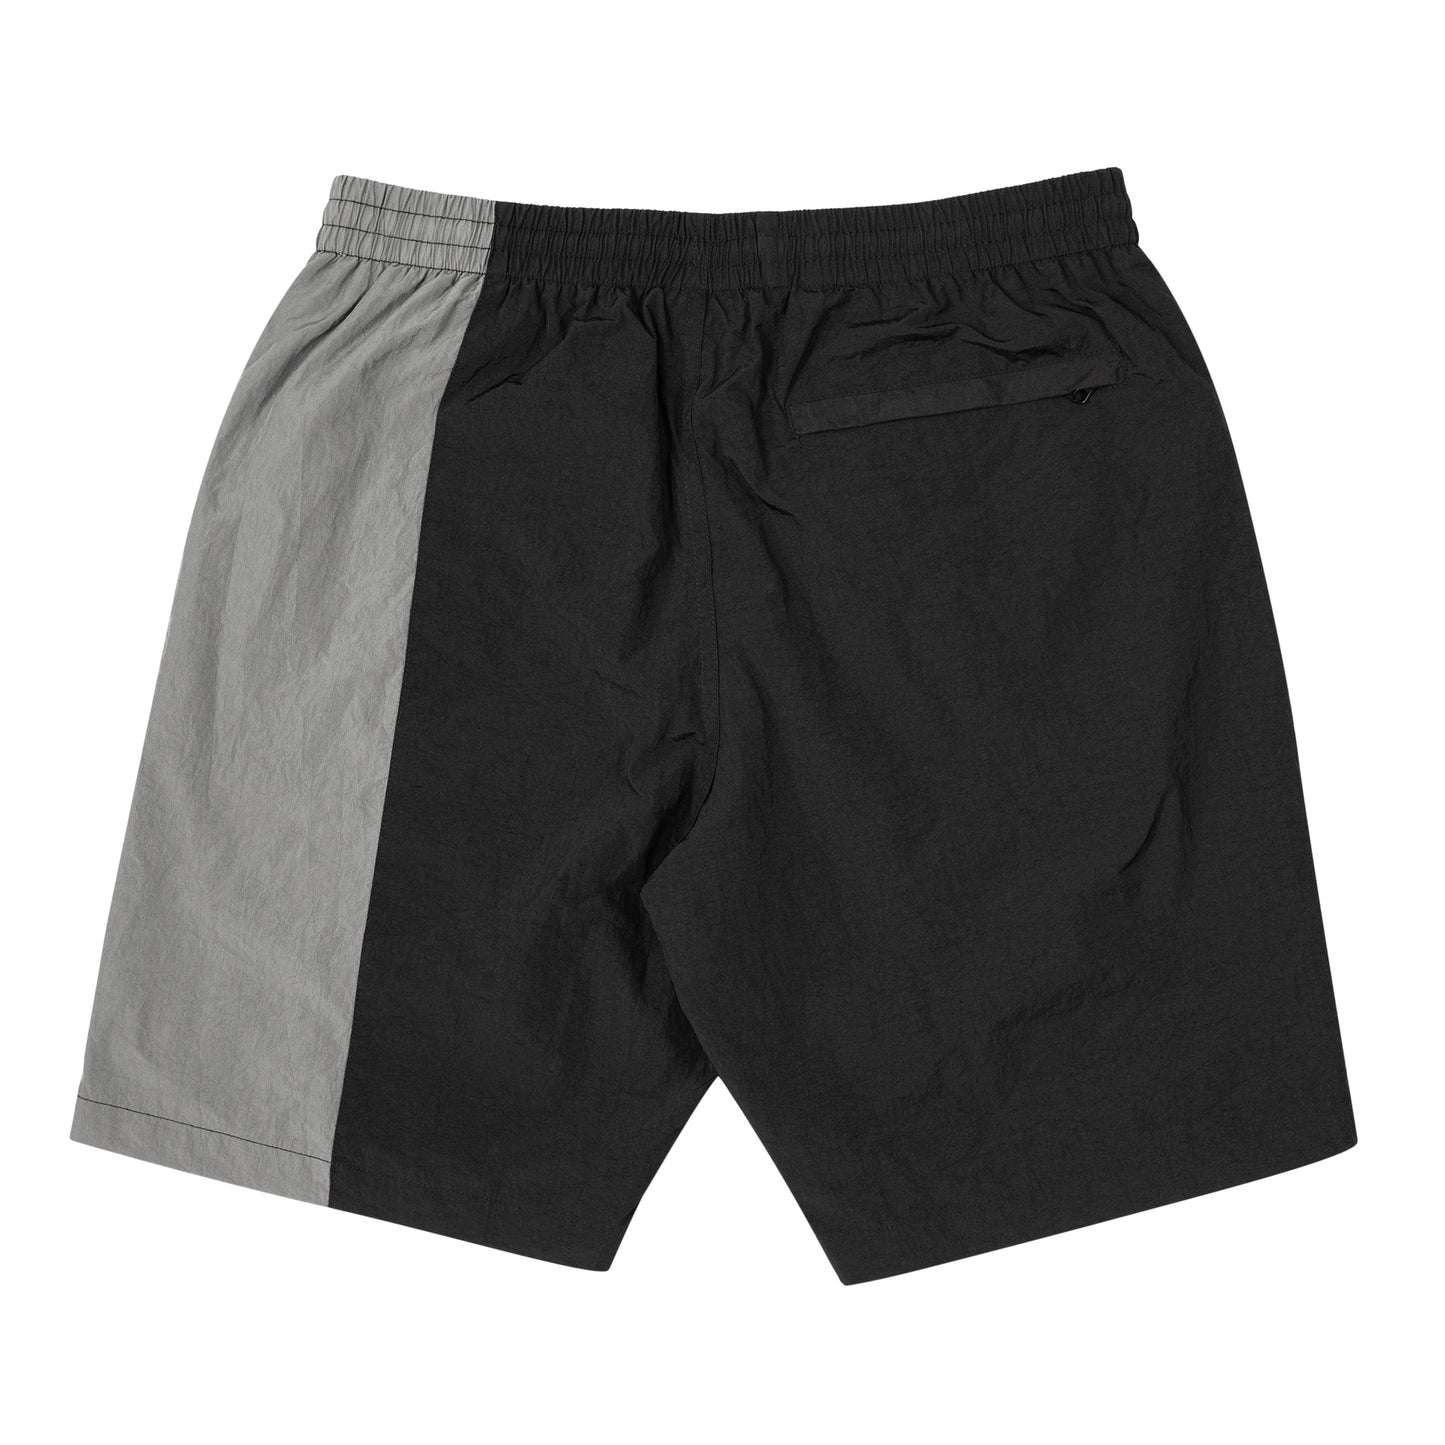 Load image into Gallery viewer, Nylon Water Shorts - Black|Grey
